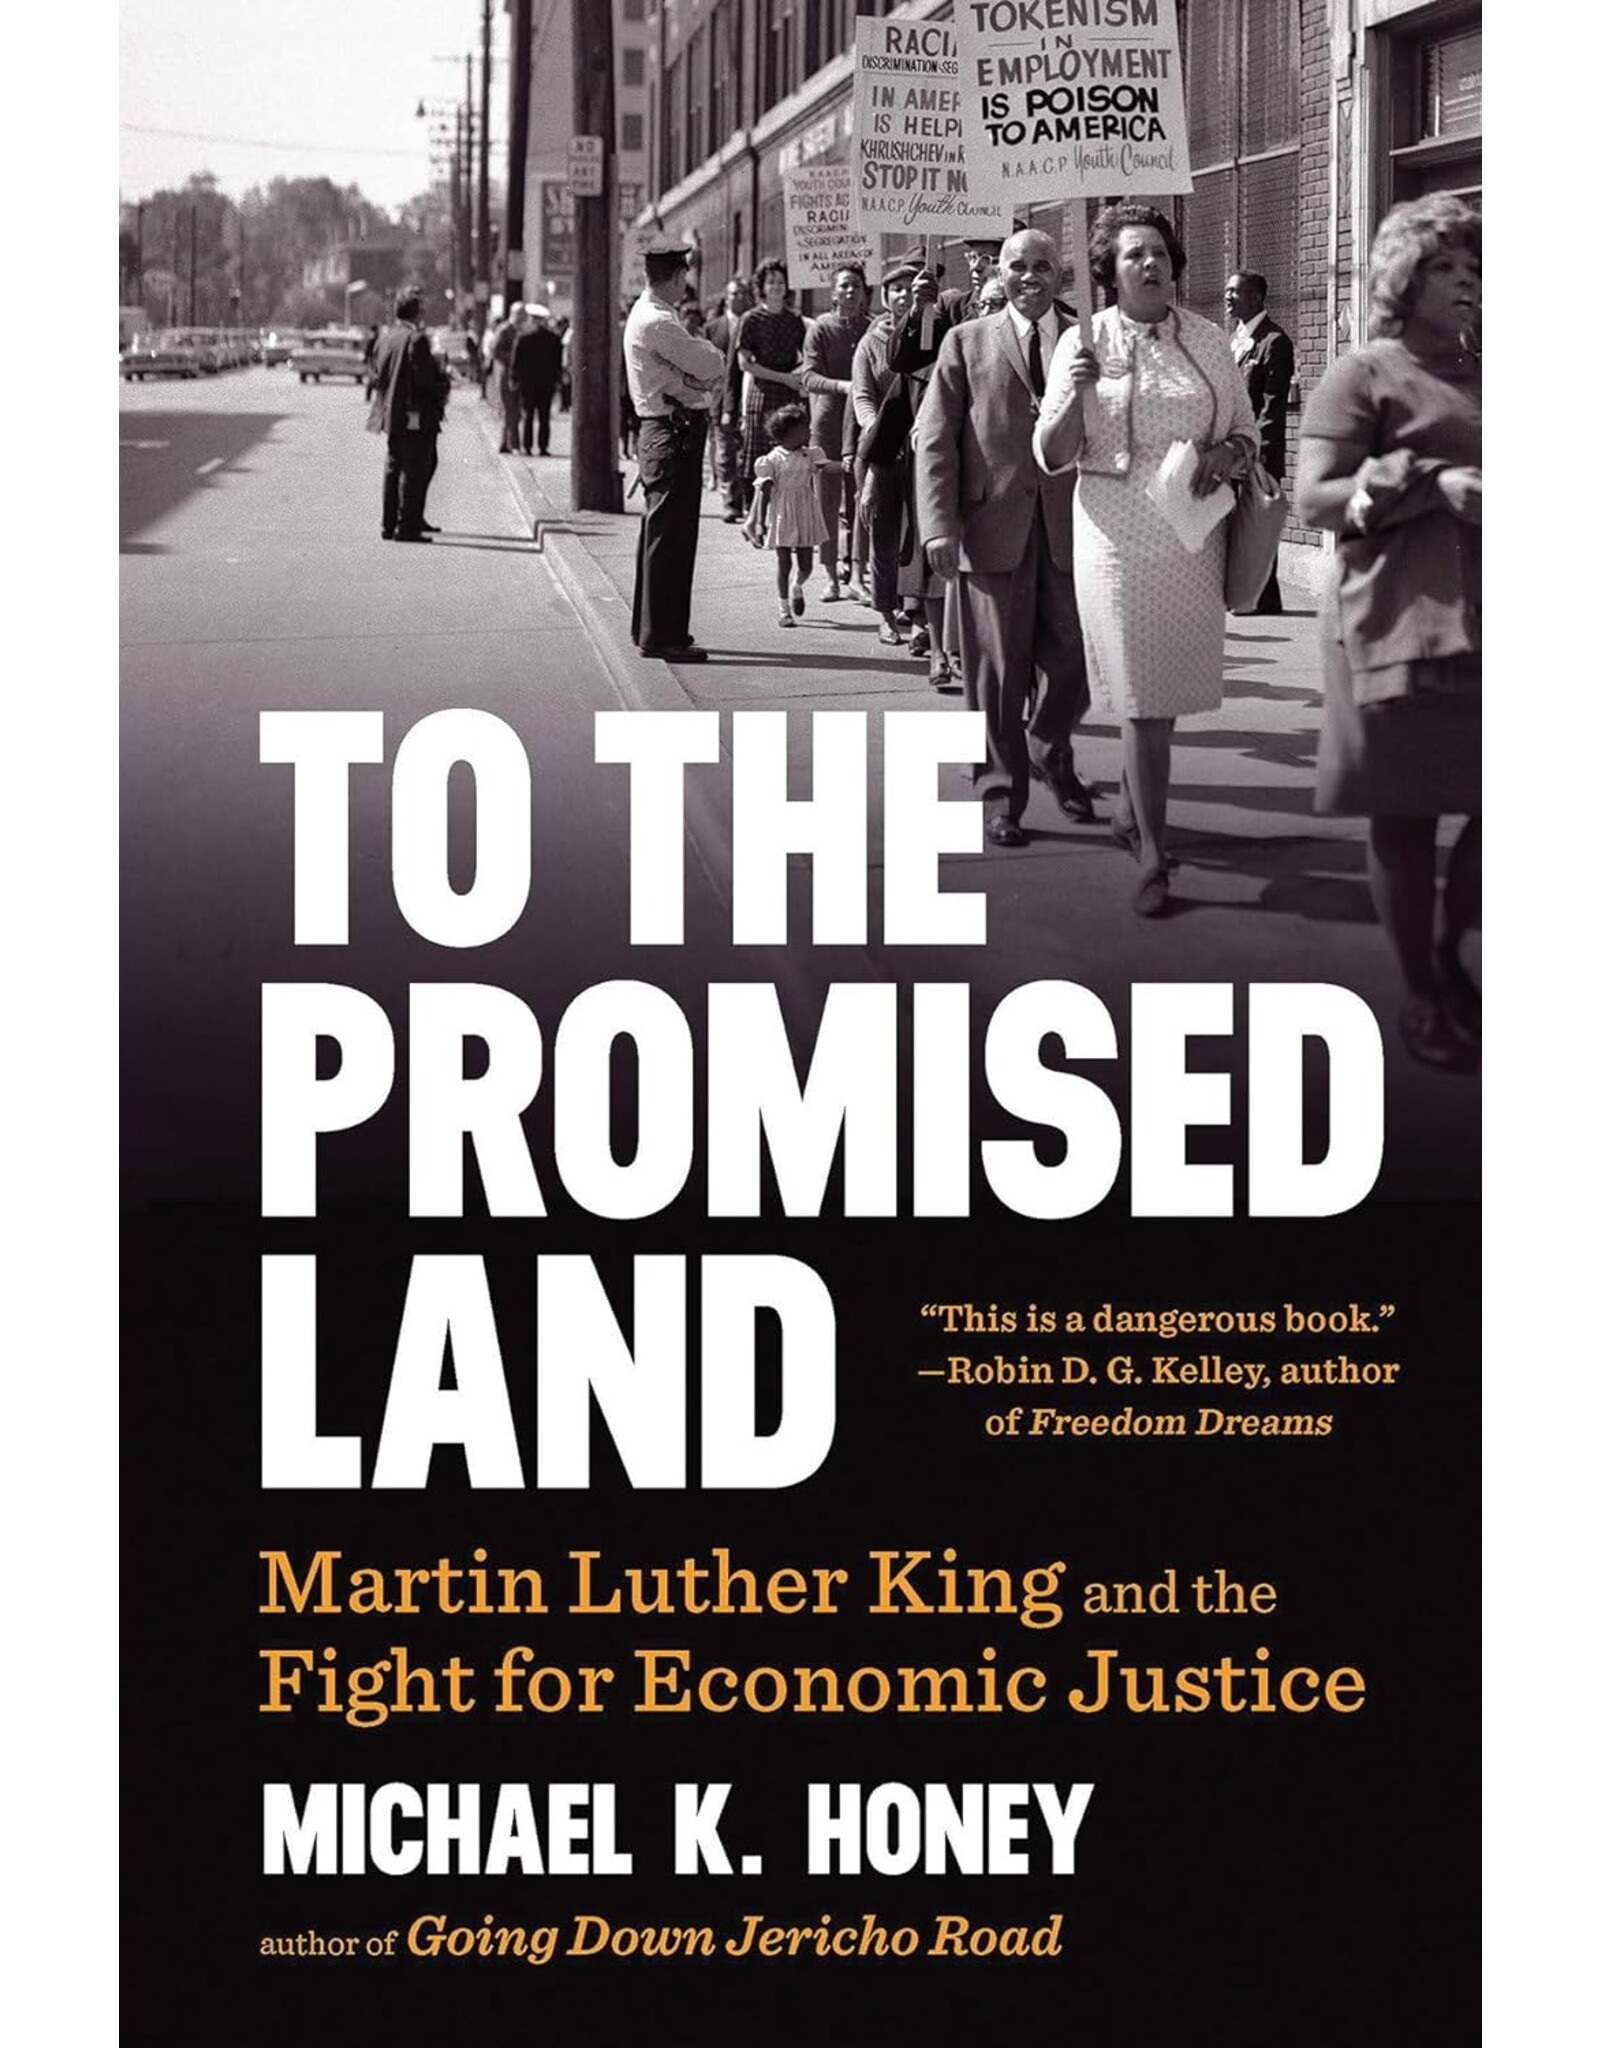 Non-Fiction: Civil Rights To the Promised Land: MLK and His Fight for Economic Justice